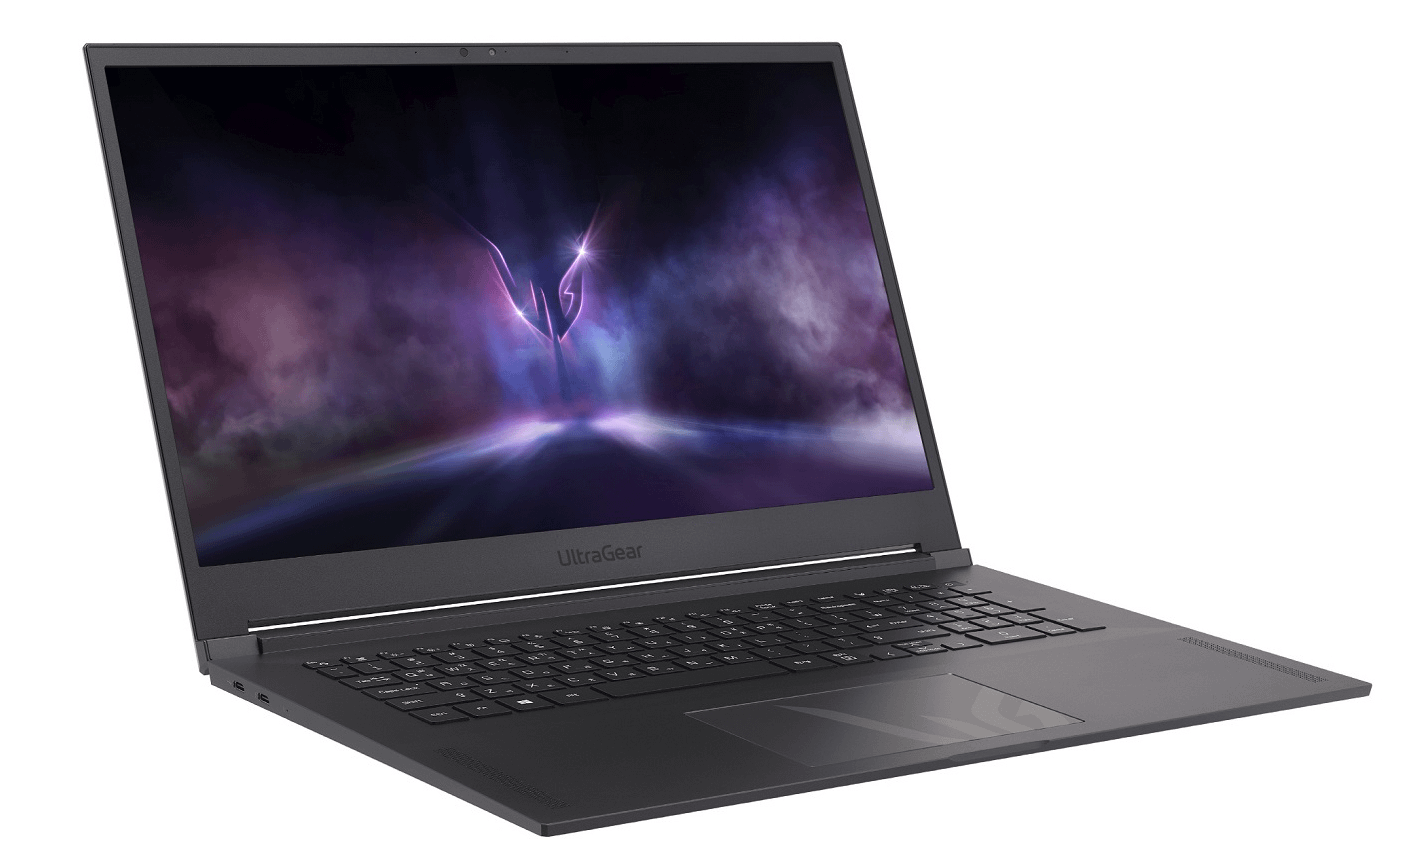 This new LG laptop is all about speed and giving gamers the advantage. LG 5a91d394 image